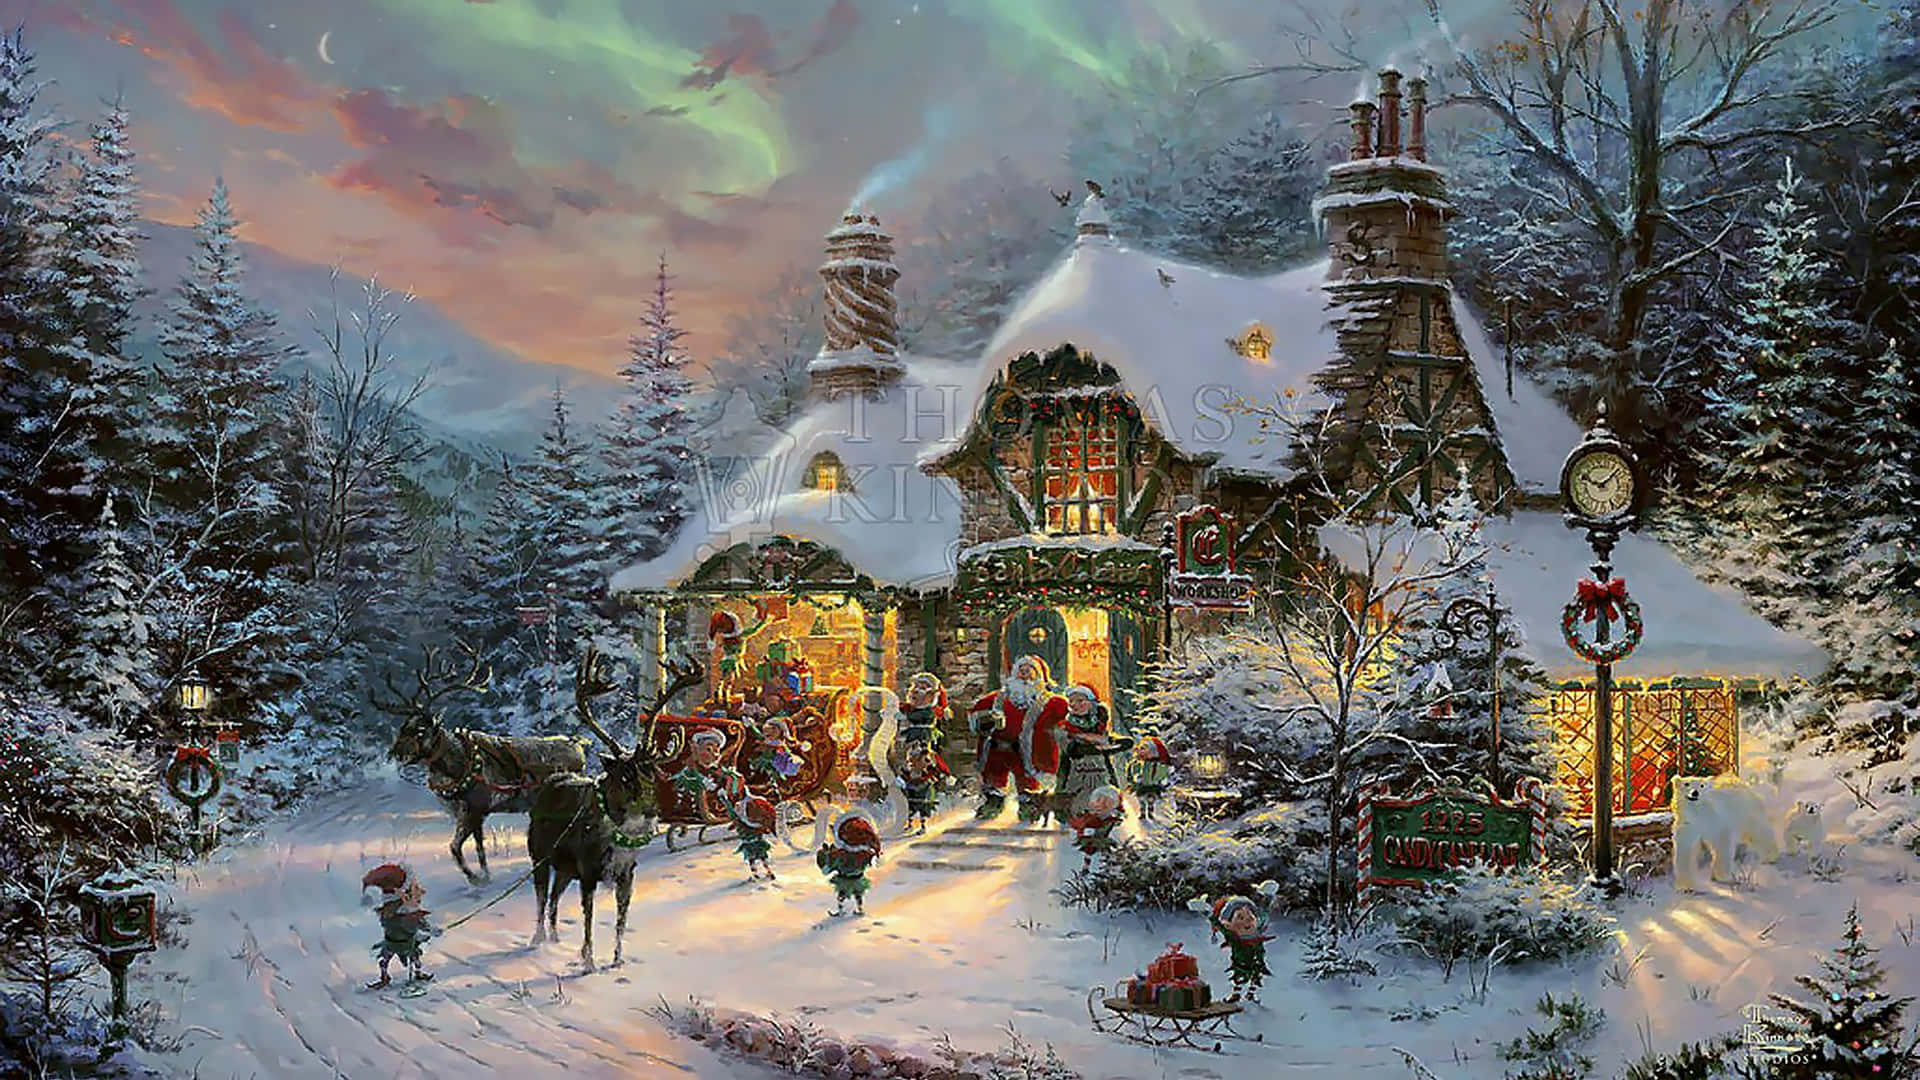 Celebrate the magic of Christmas with this stunning 1920x1080 HD wallpaper Wallpaper